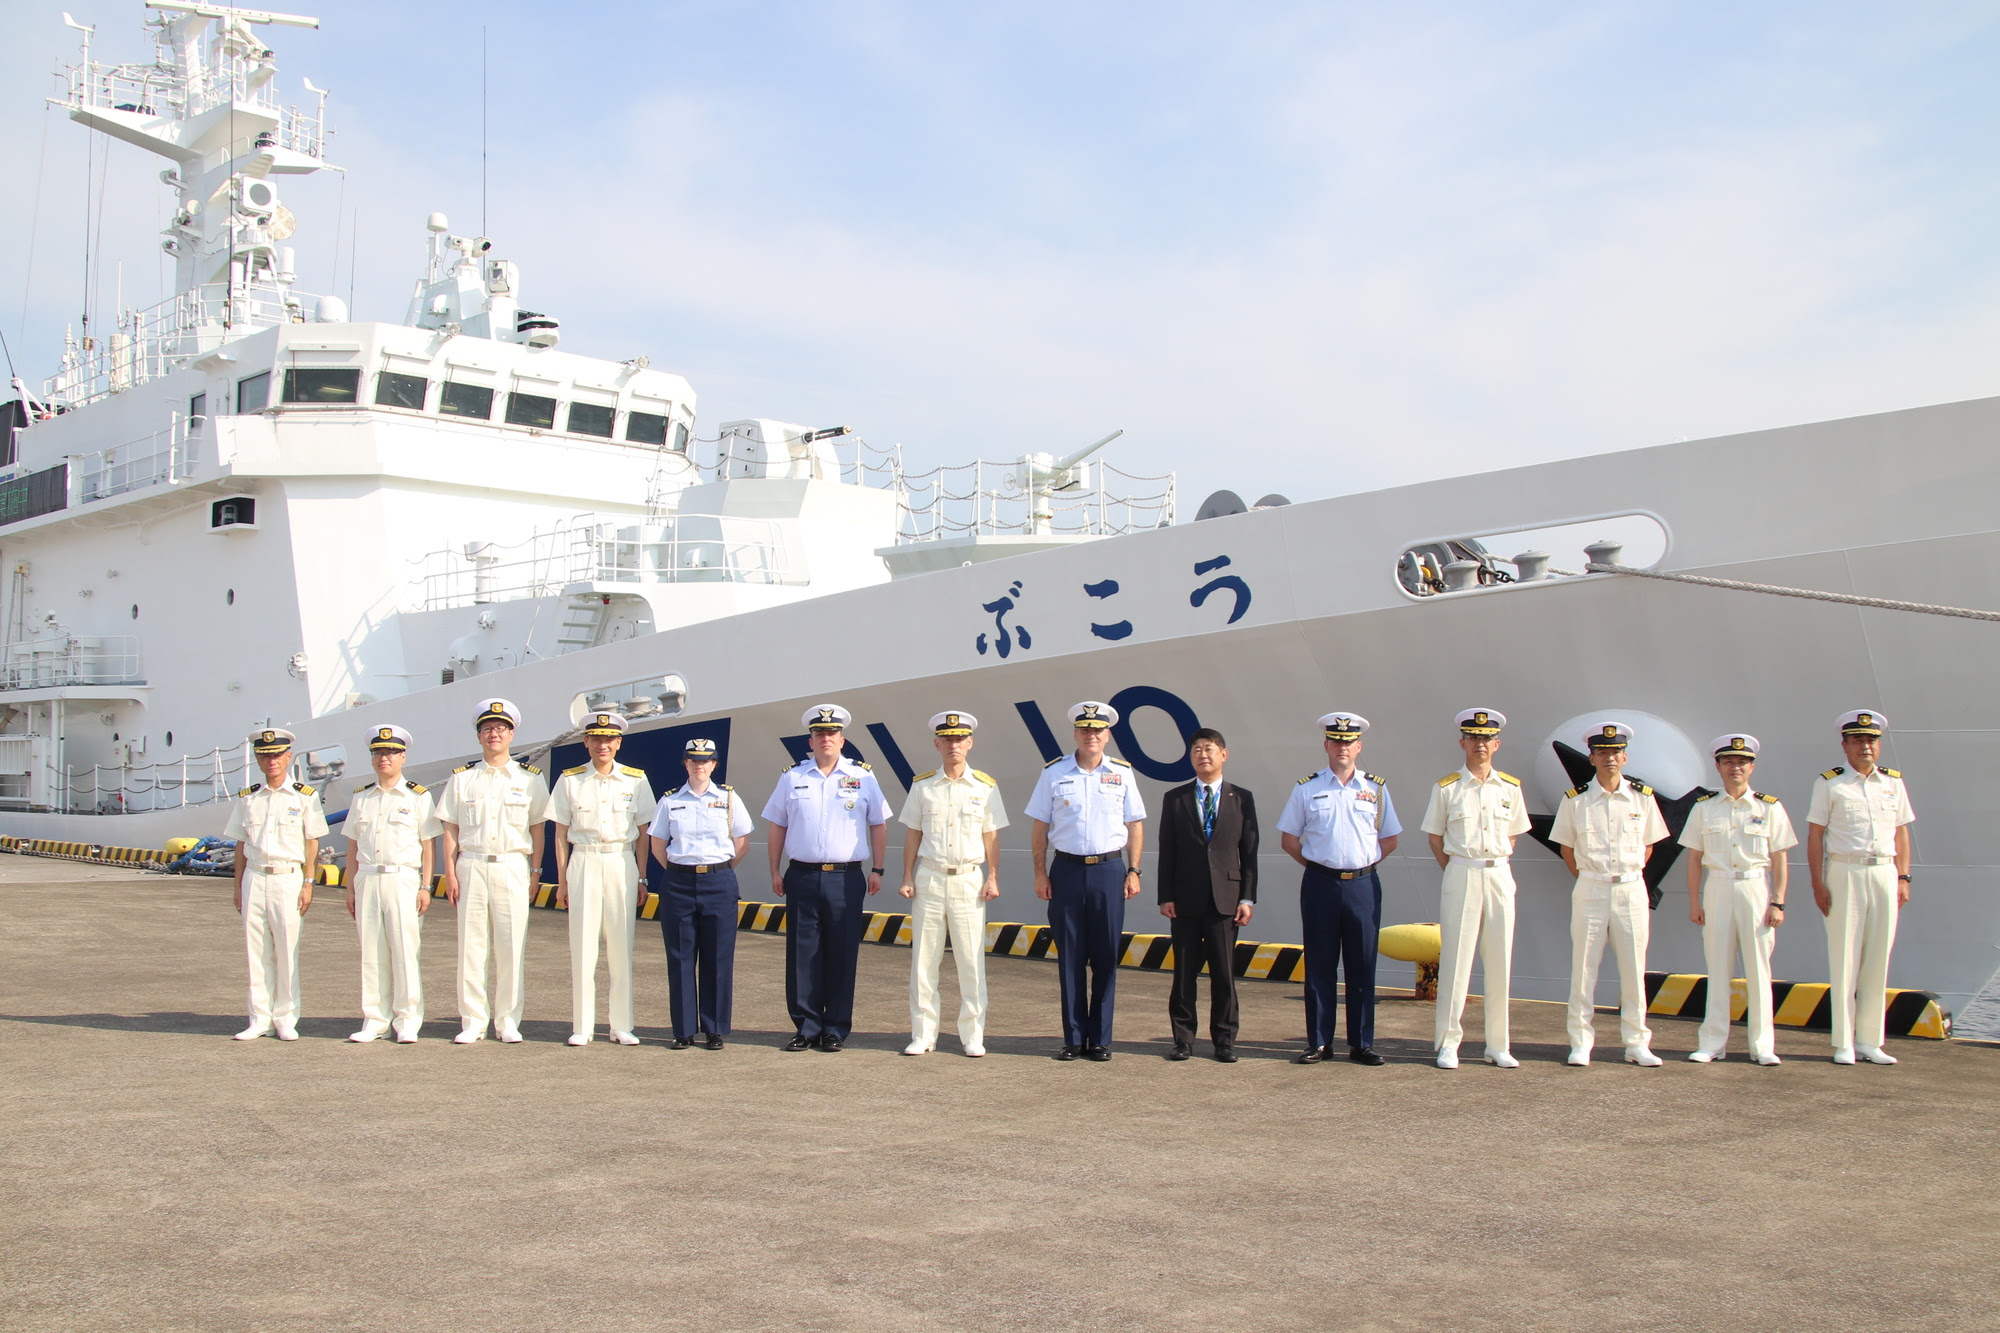 U.S. and Japan Coast Guards Strengthen Their Alliance, Focus on Indo-Pacific Region